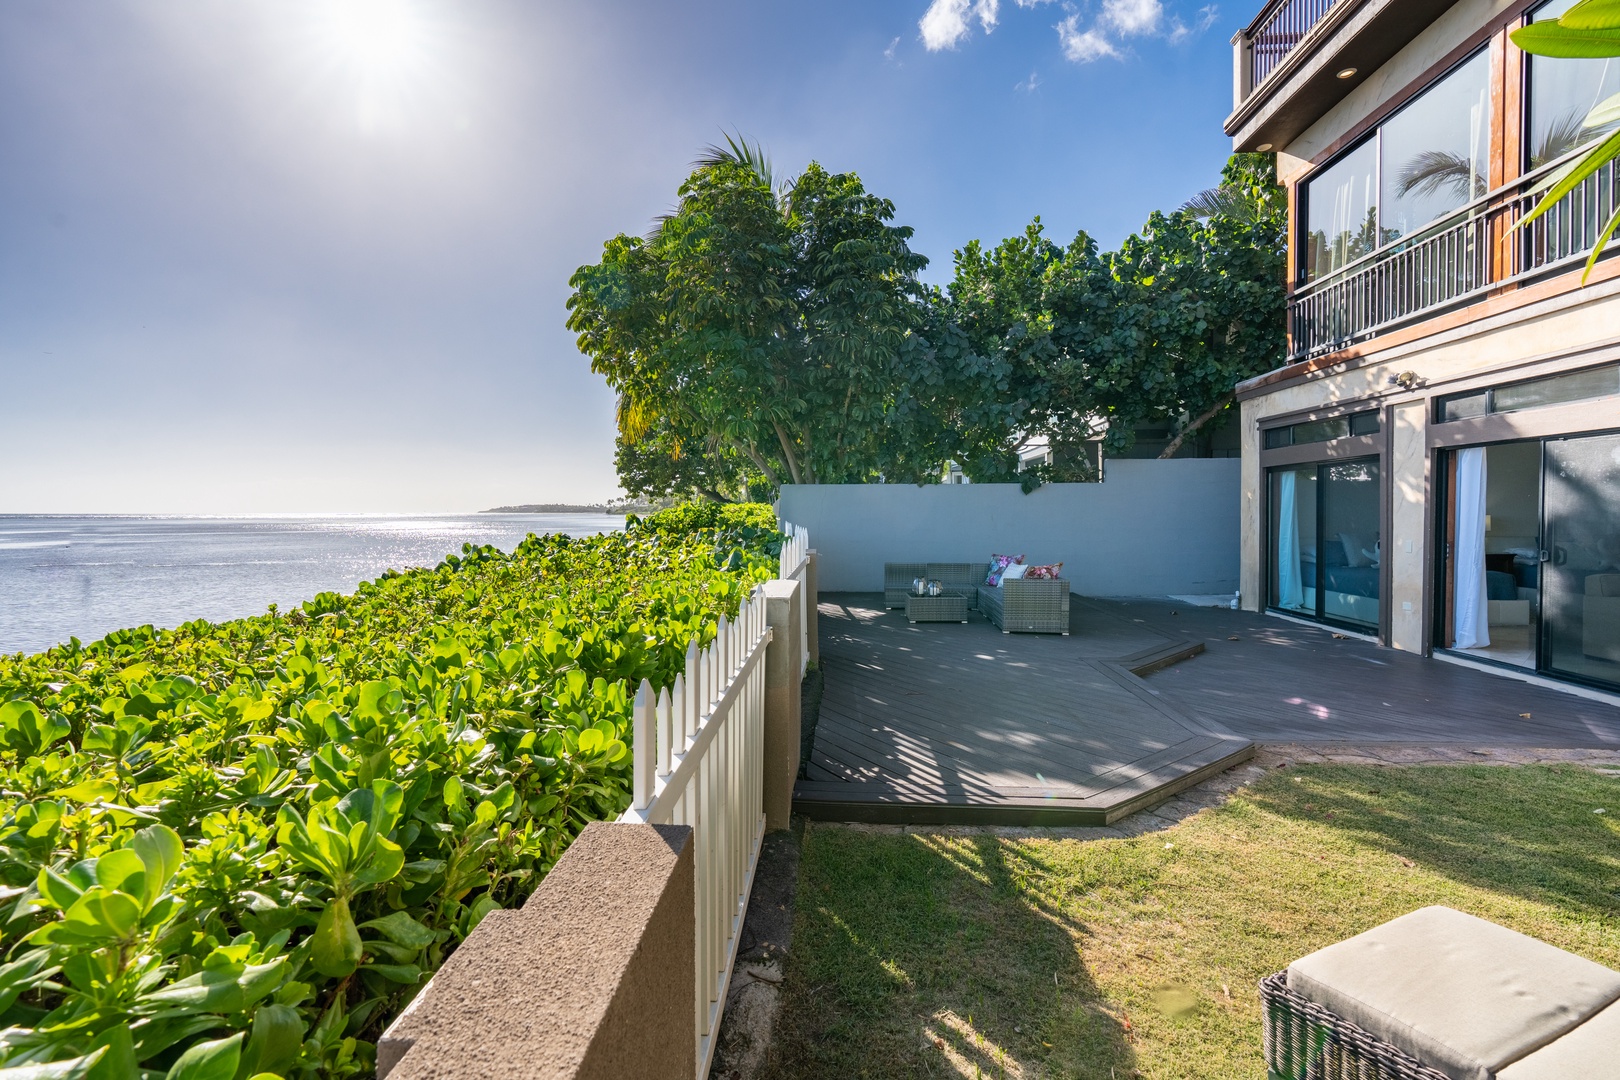 Honolulu Vacation Rentals, Wailupe Seaside - Surrounded by tropical plants.